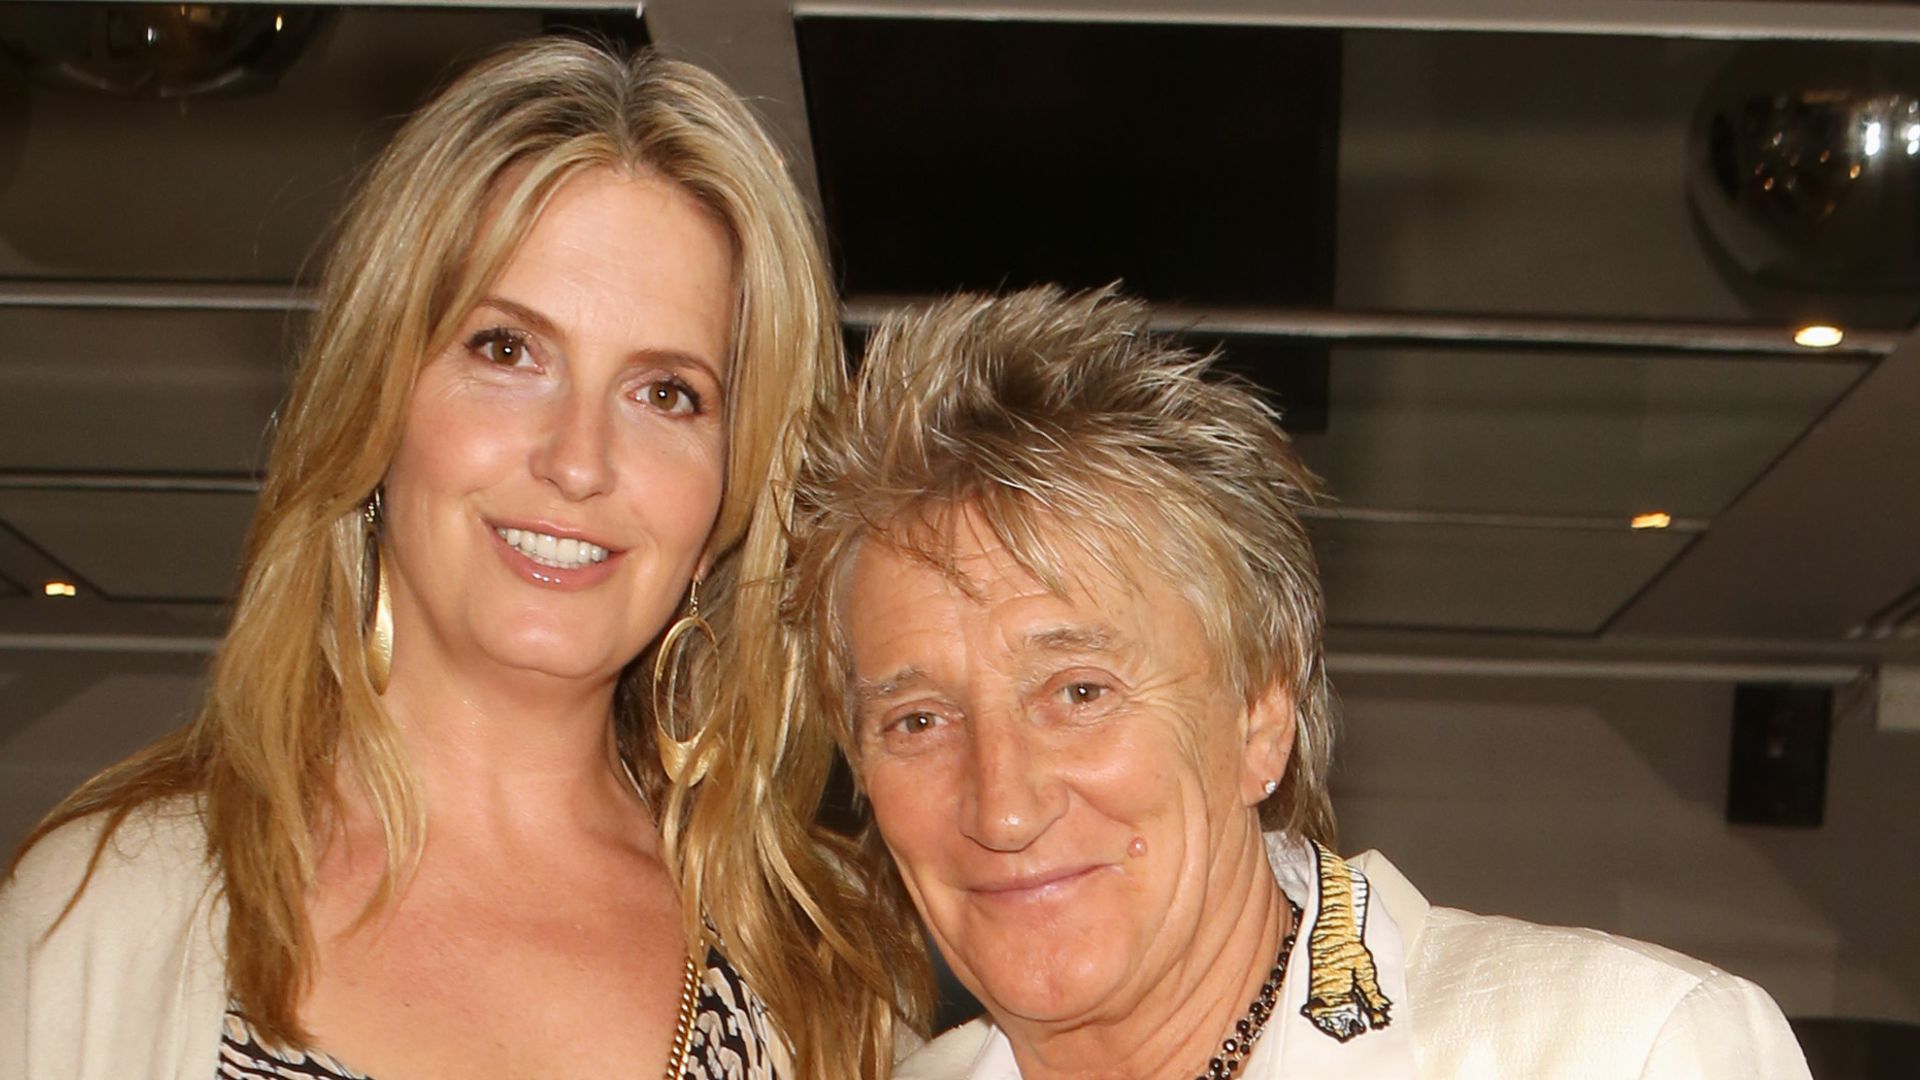 Penny Lancaster stood with Rod Stewart